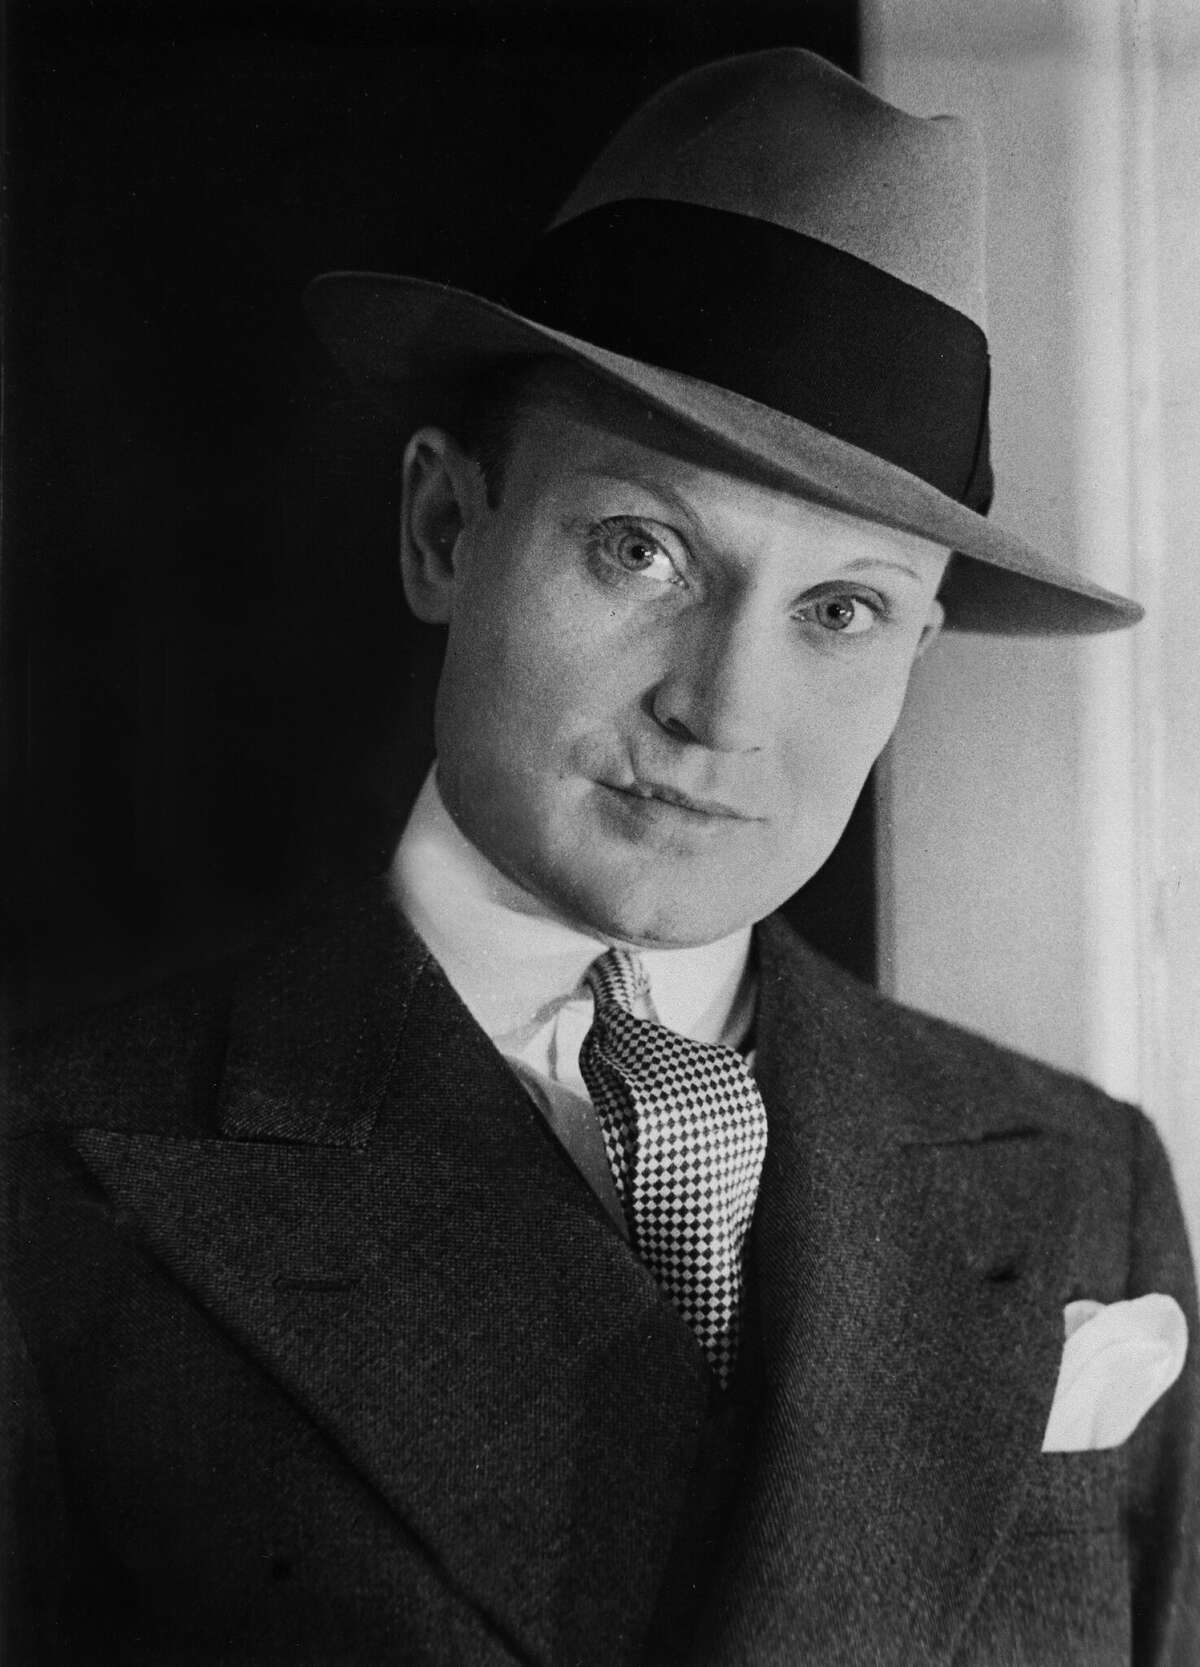 Portrait of Vander Clyde Broadway in a men's suit with a powdered face, 1932.